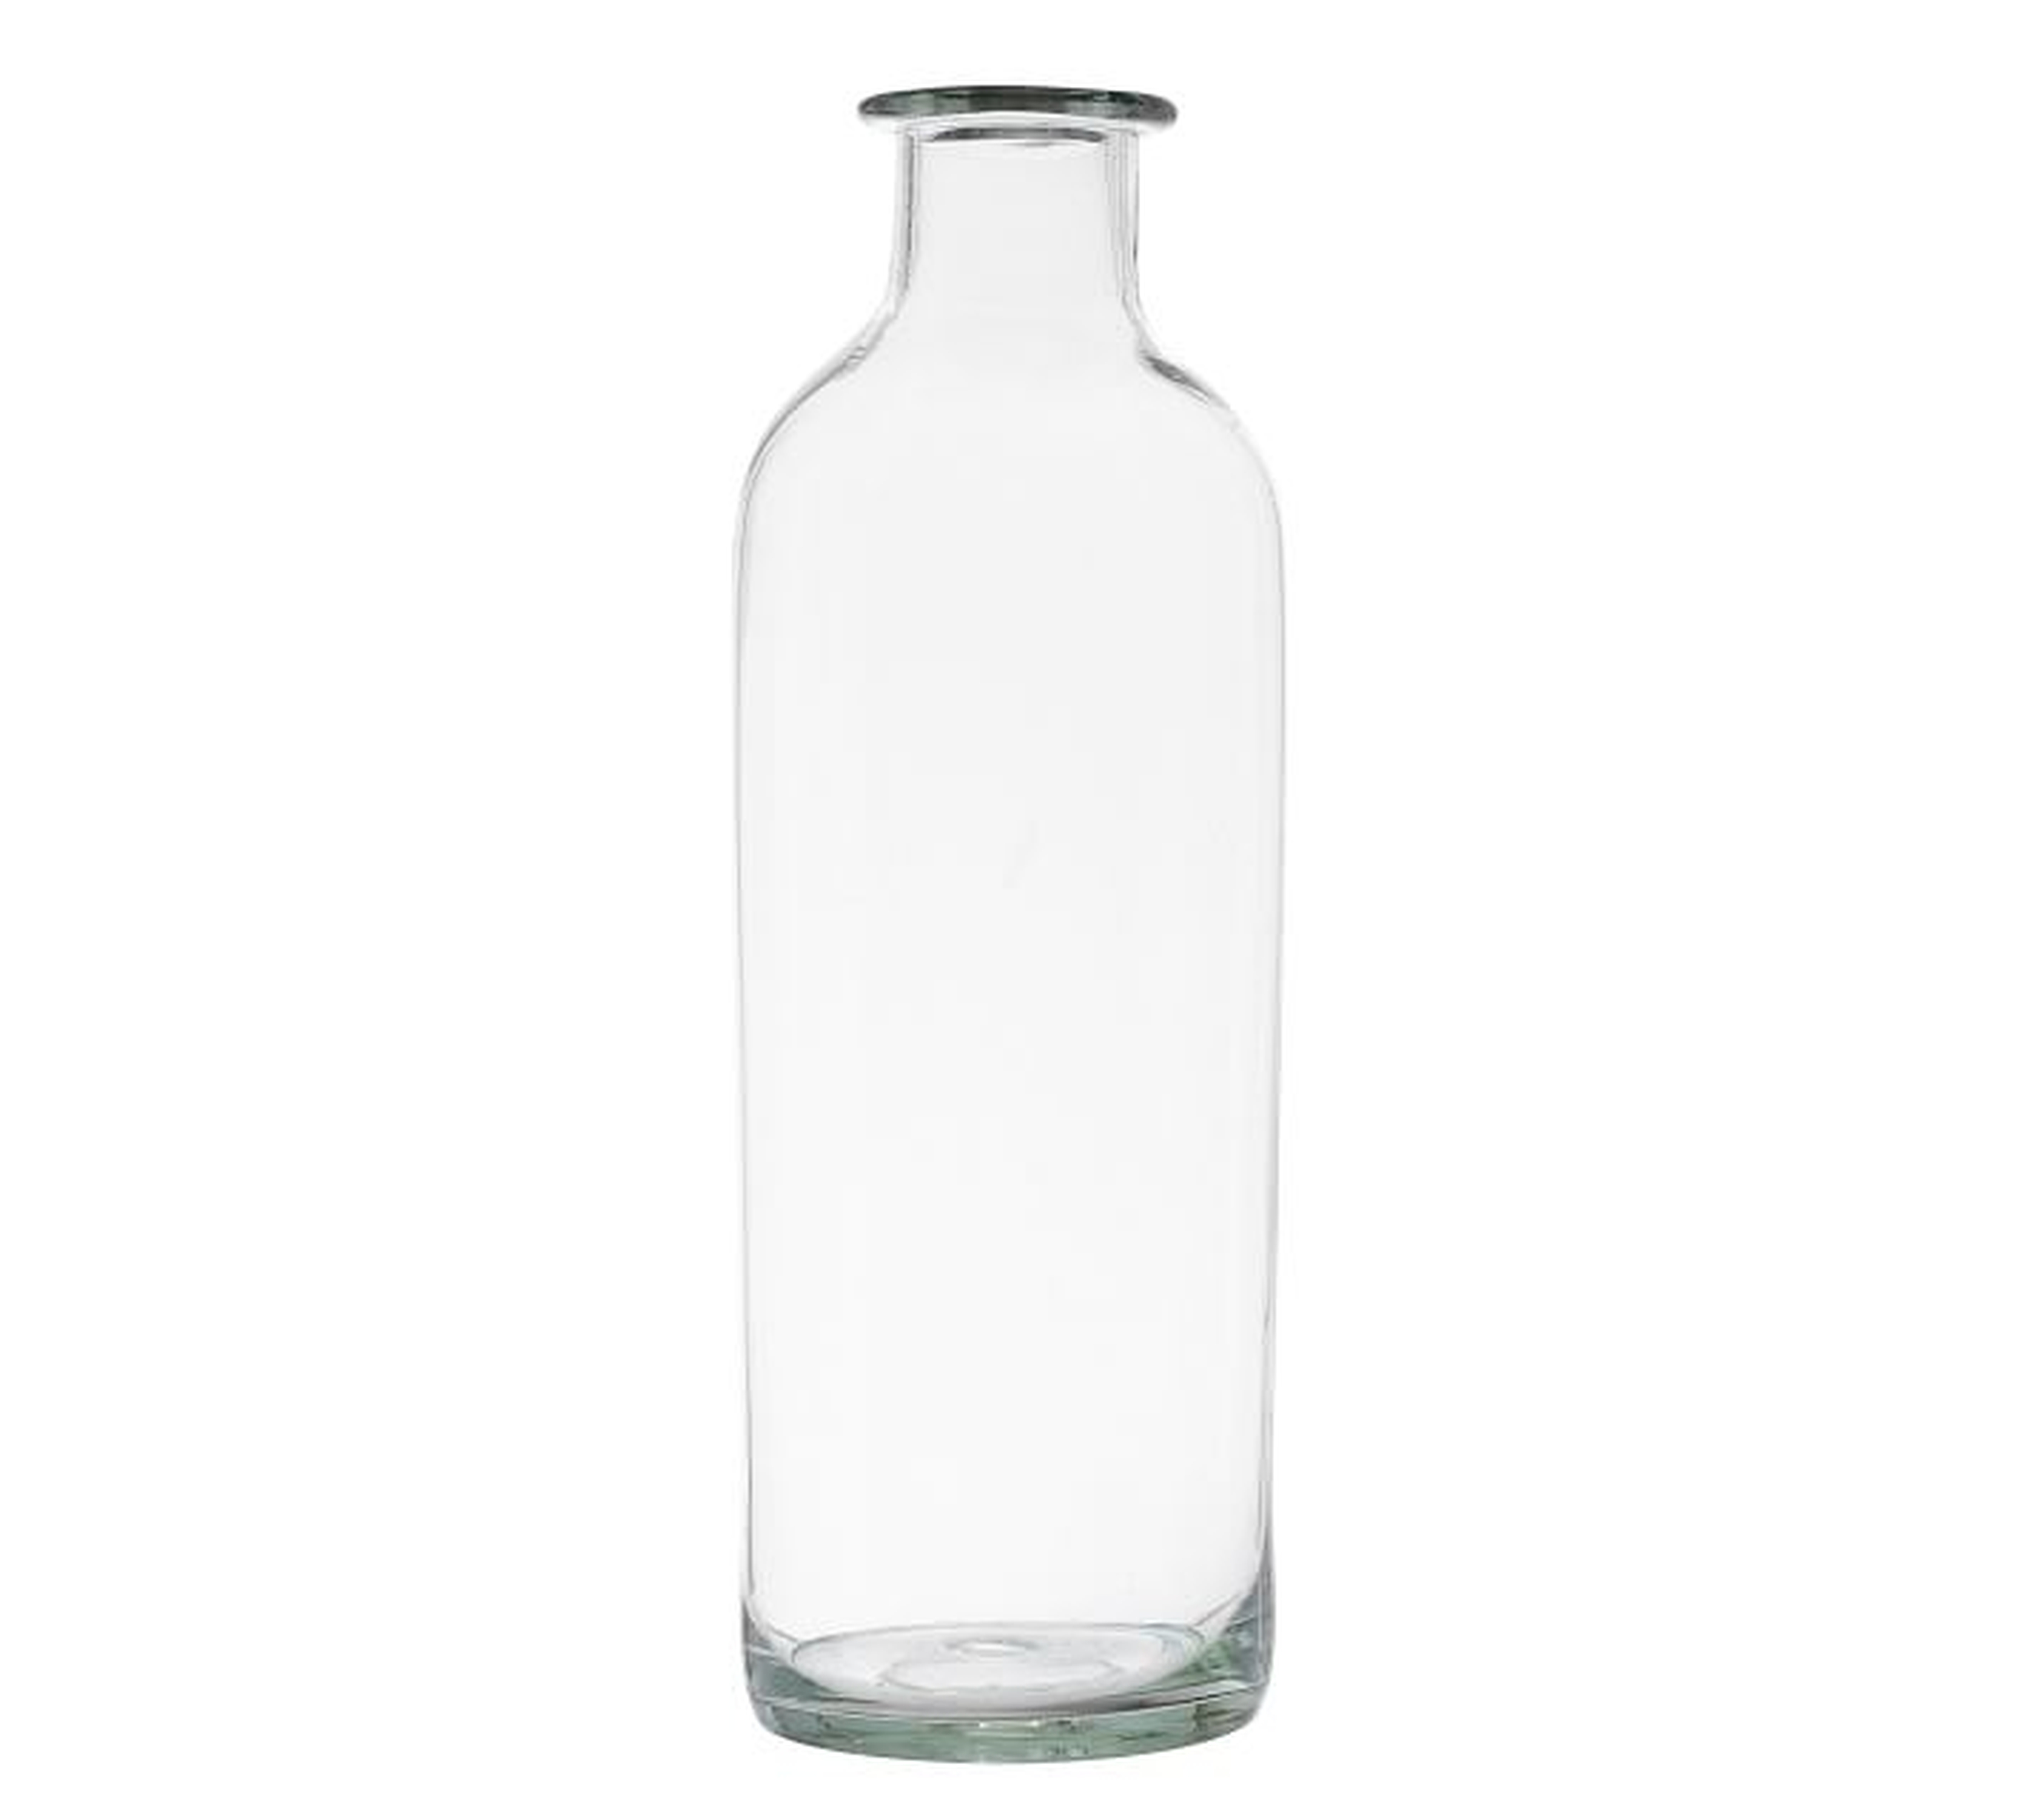 Recycled Glass Vase - small bottle - Pottery Barn